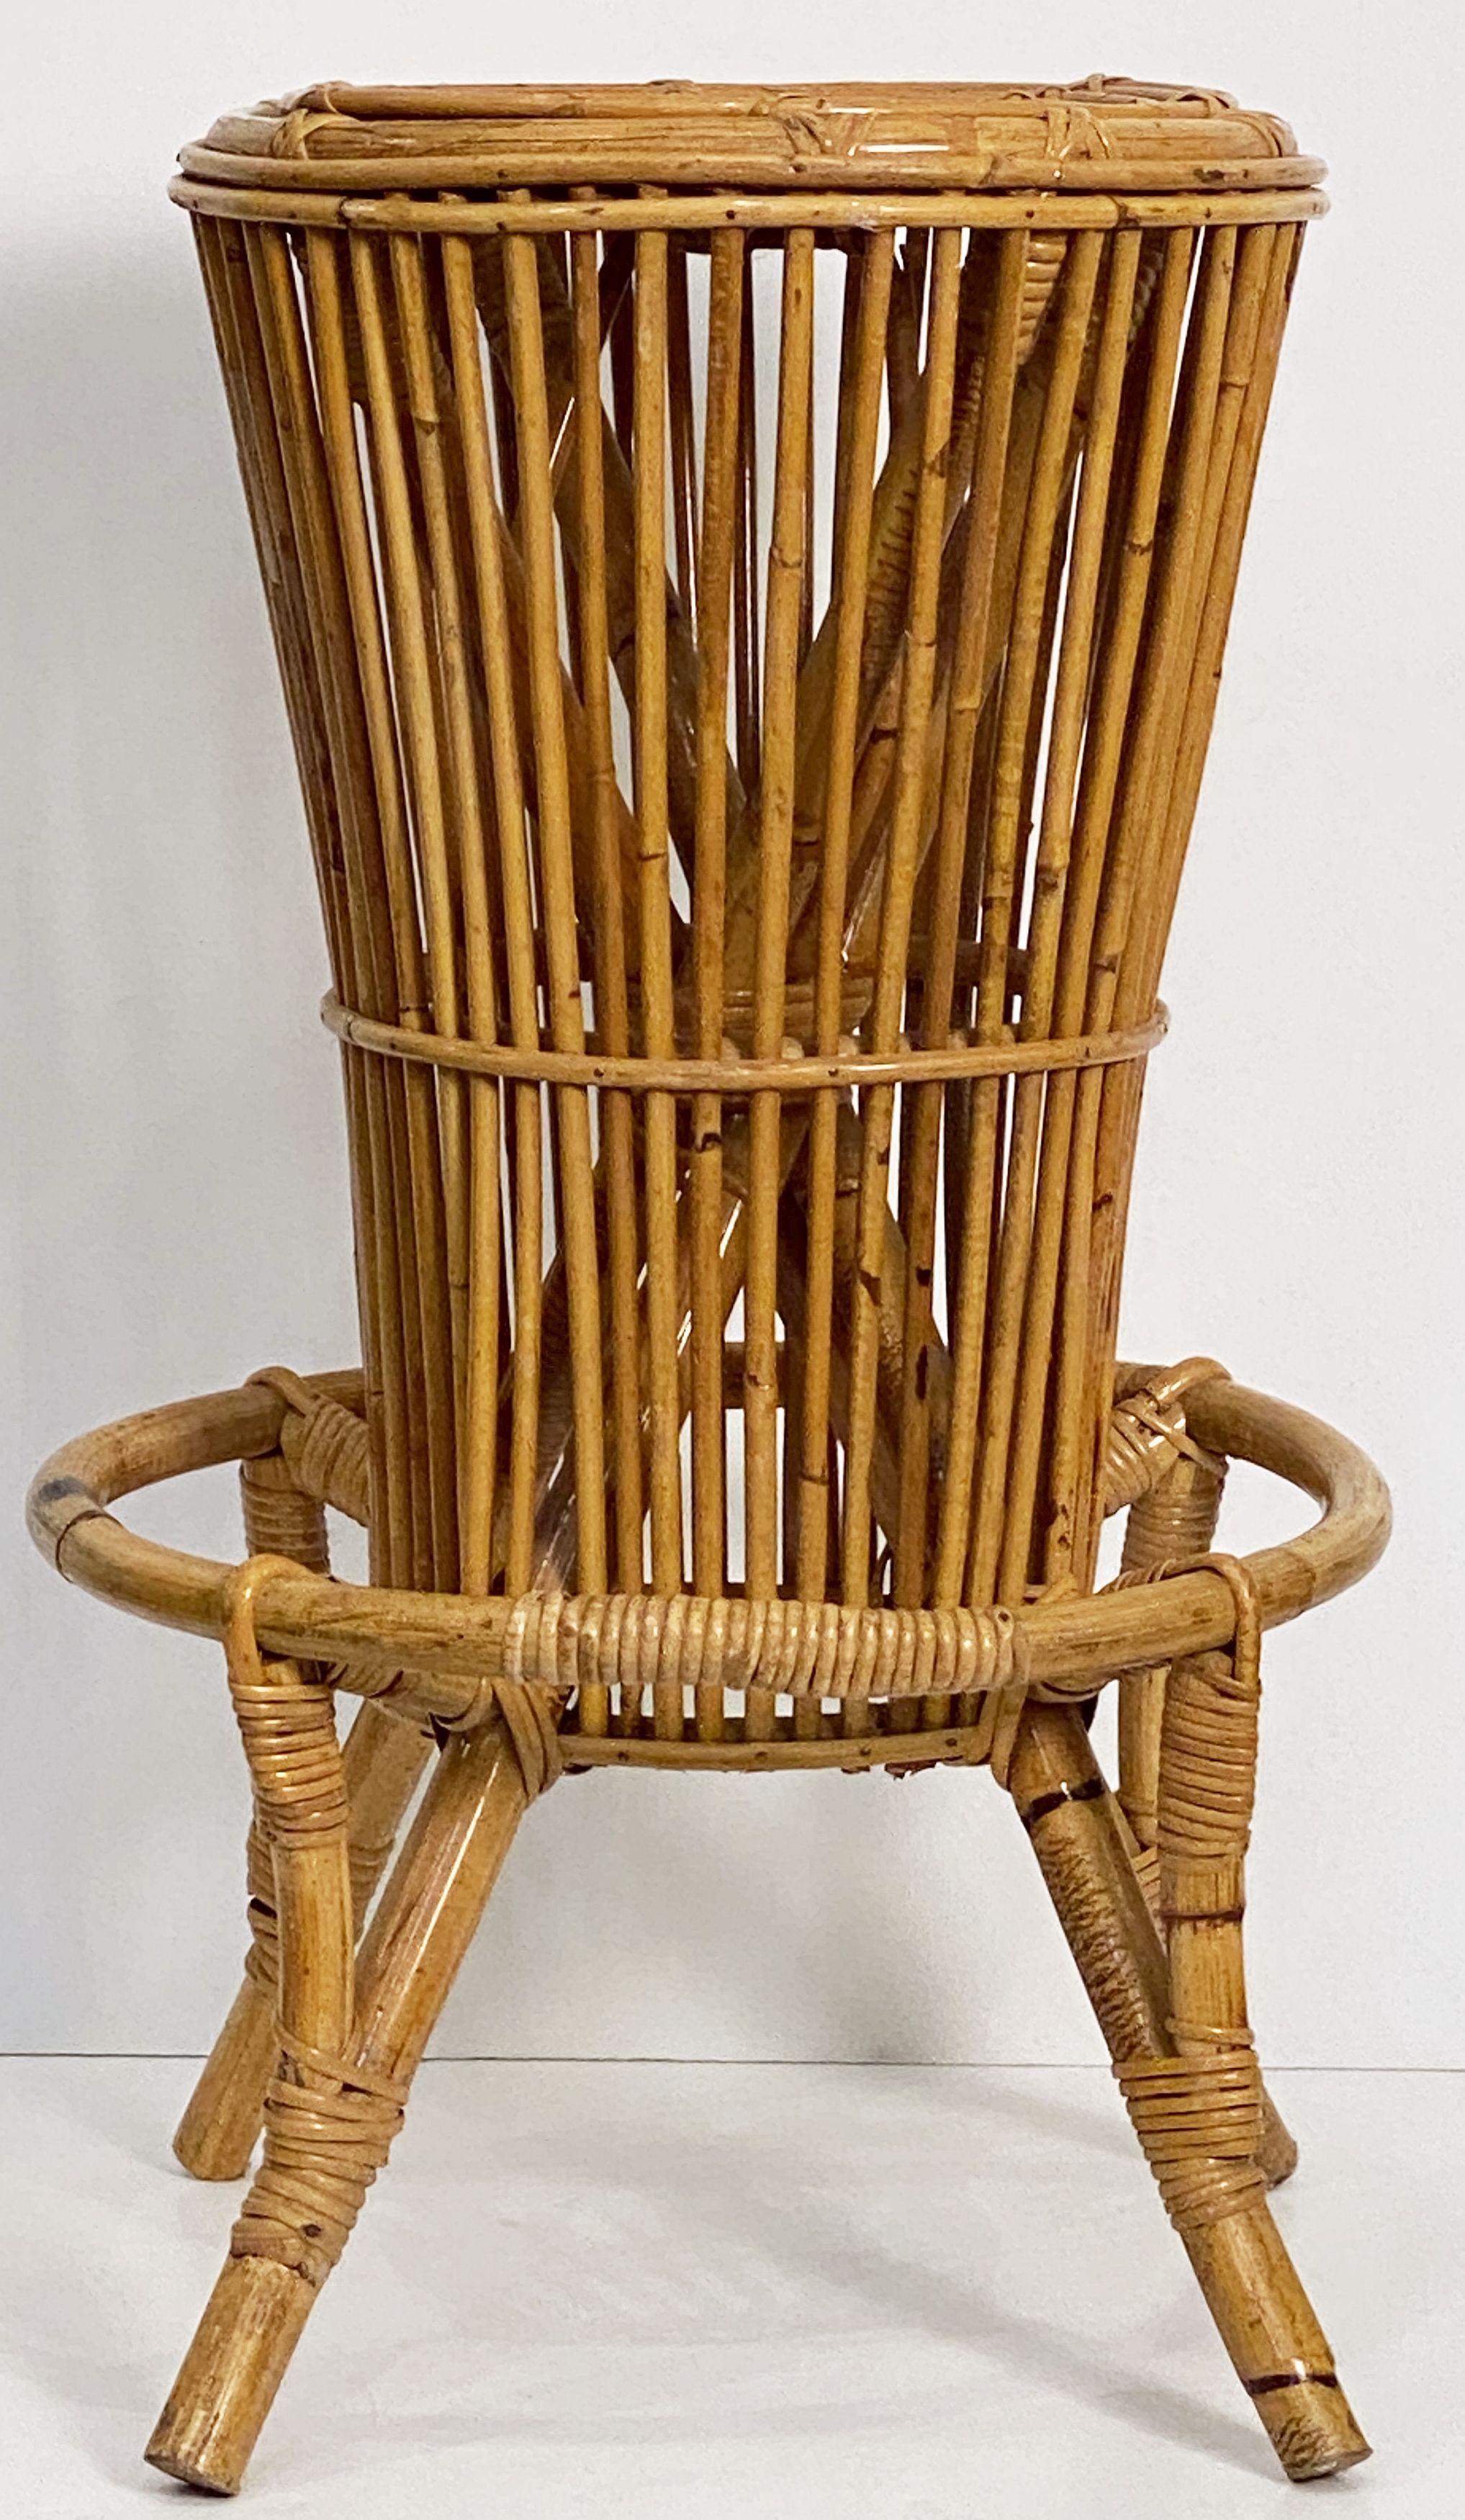 Italian Stool of Rattan and Bamboo from the Mid-20th Century For Sale 7